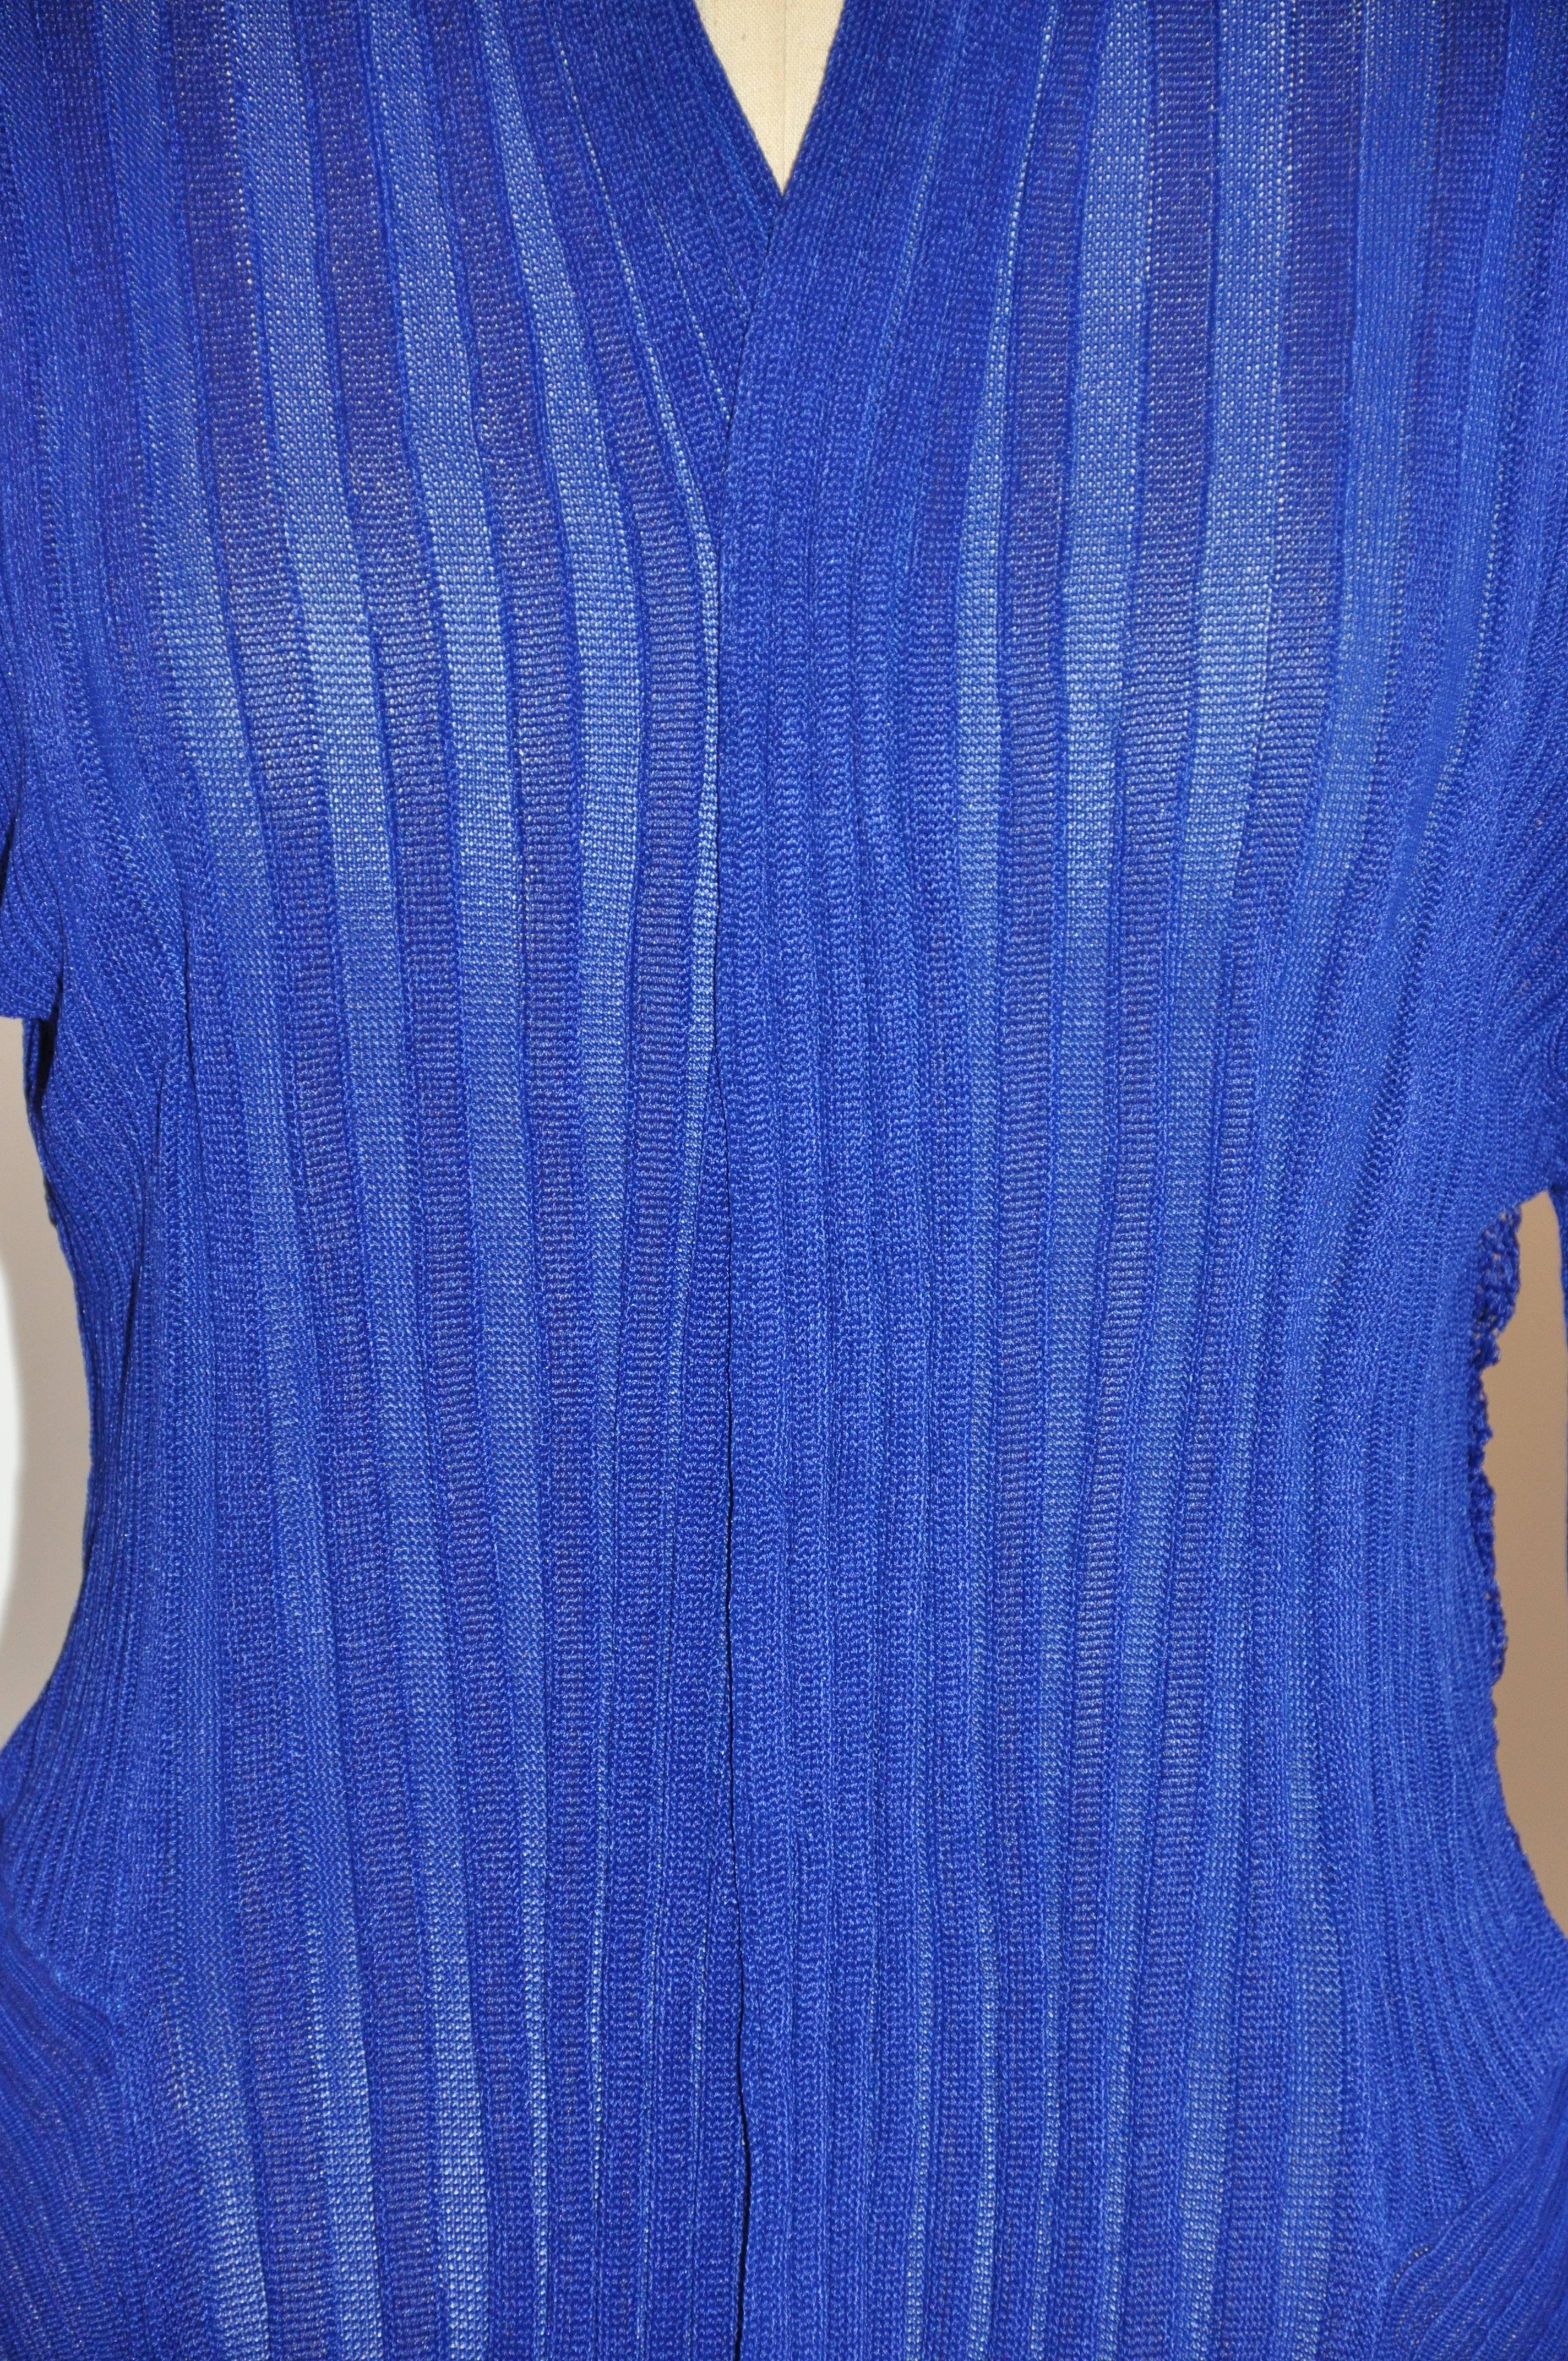        This wonderfully and beautifully draped bold blue lapis asymmetric accented with woven lace on the backside open cardigan measures 31 - 36 inches in length. The shoulder measures 18 inches across, sleeves are 27 inches, collar width is 6